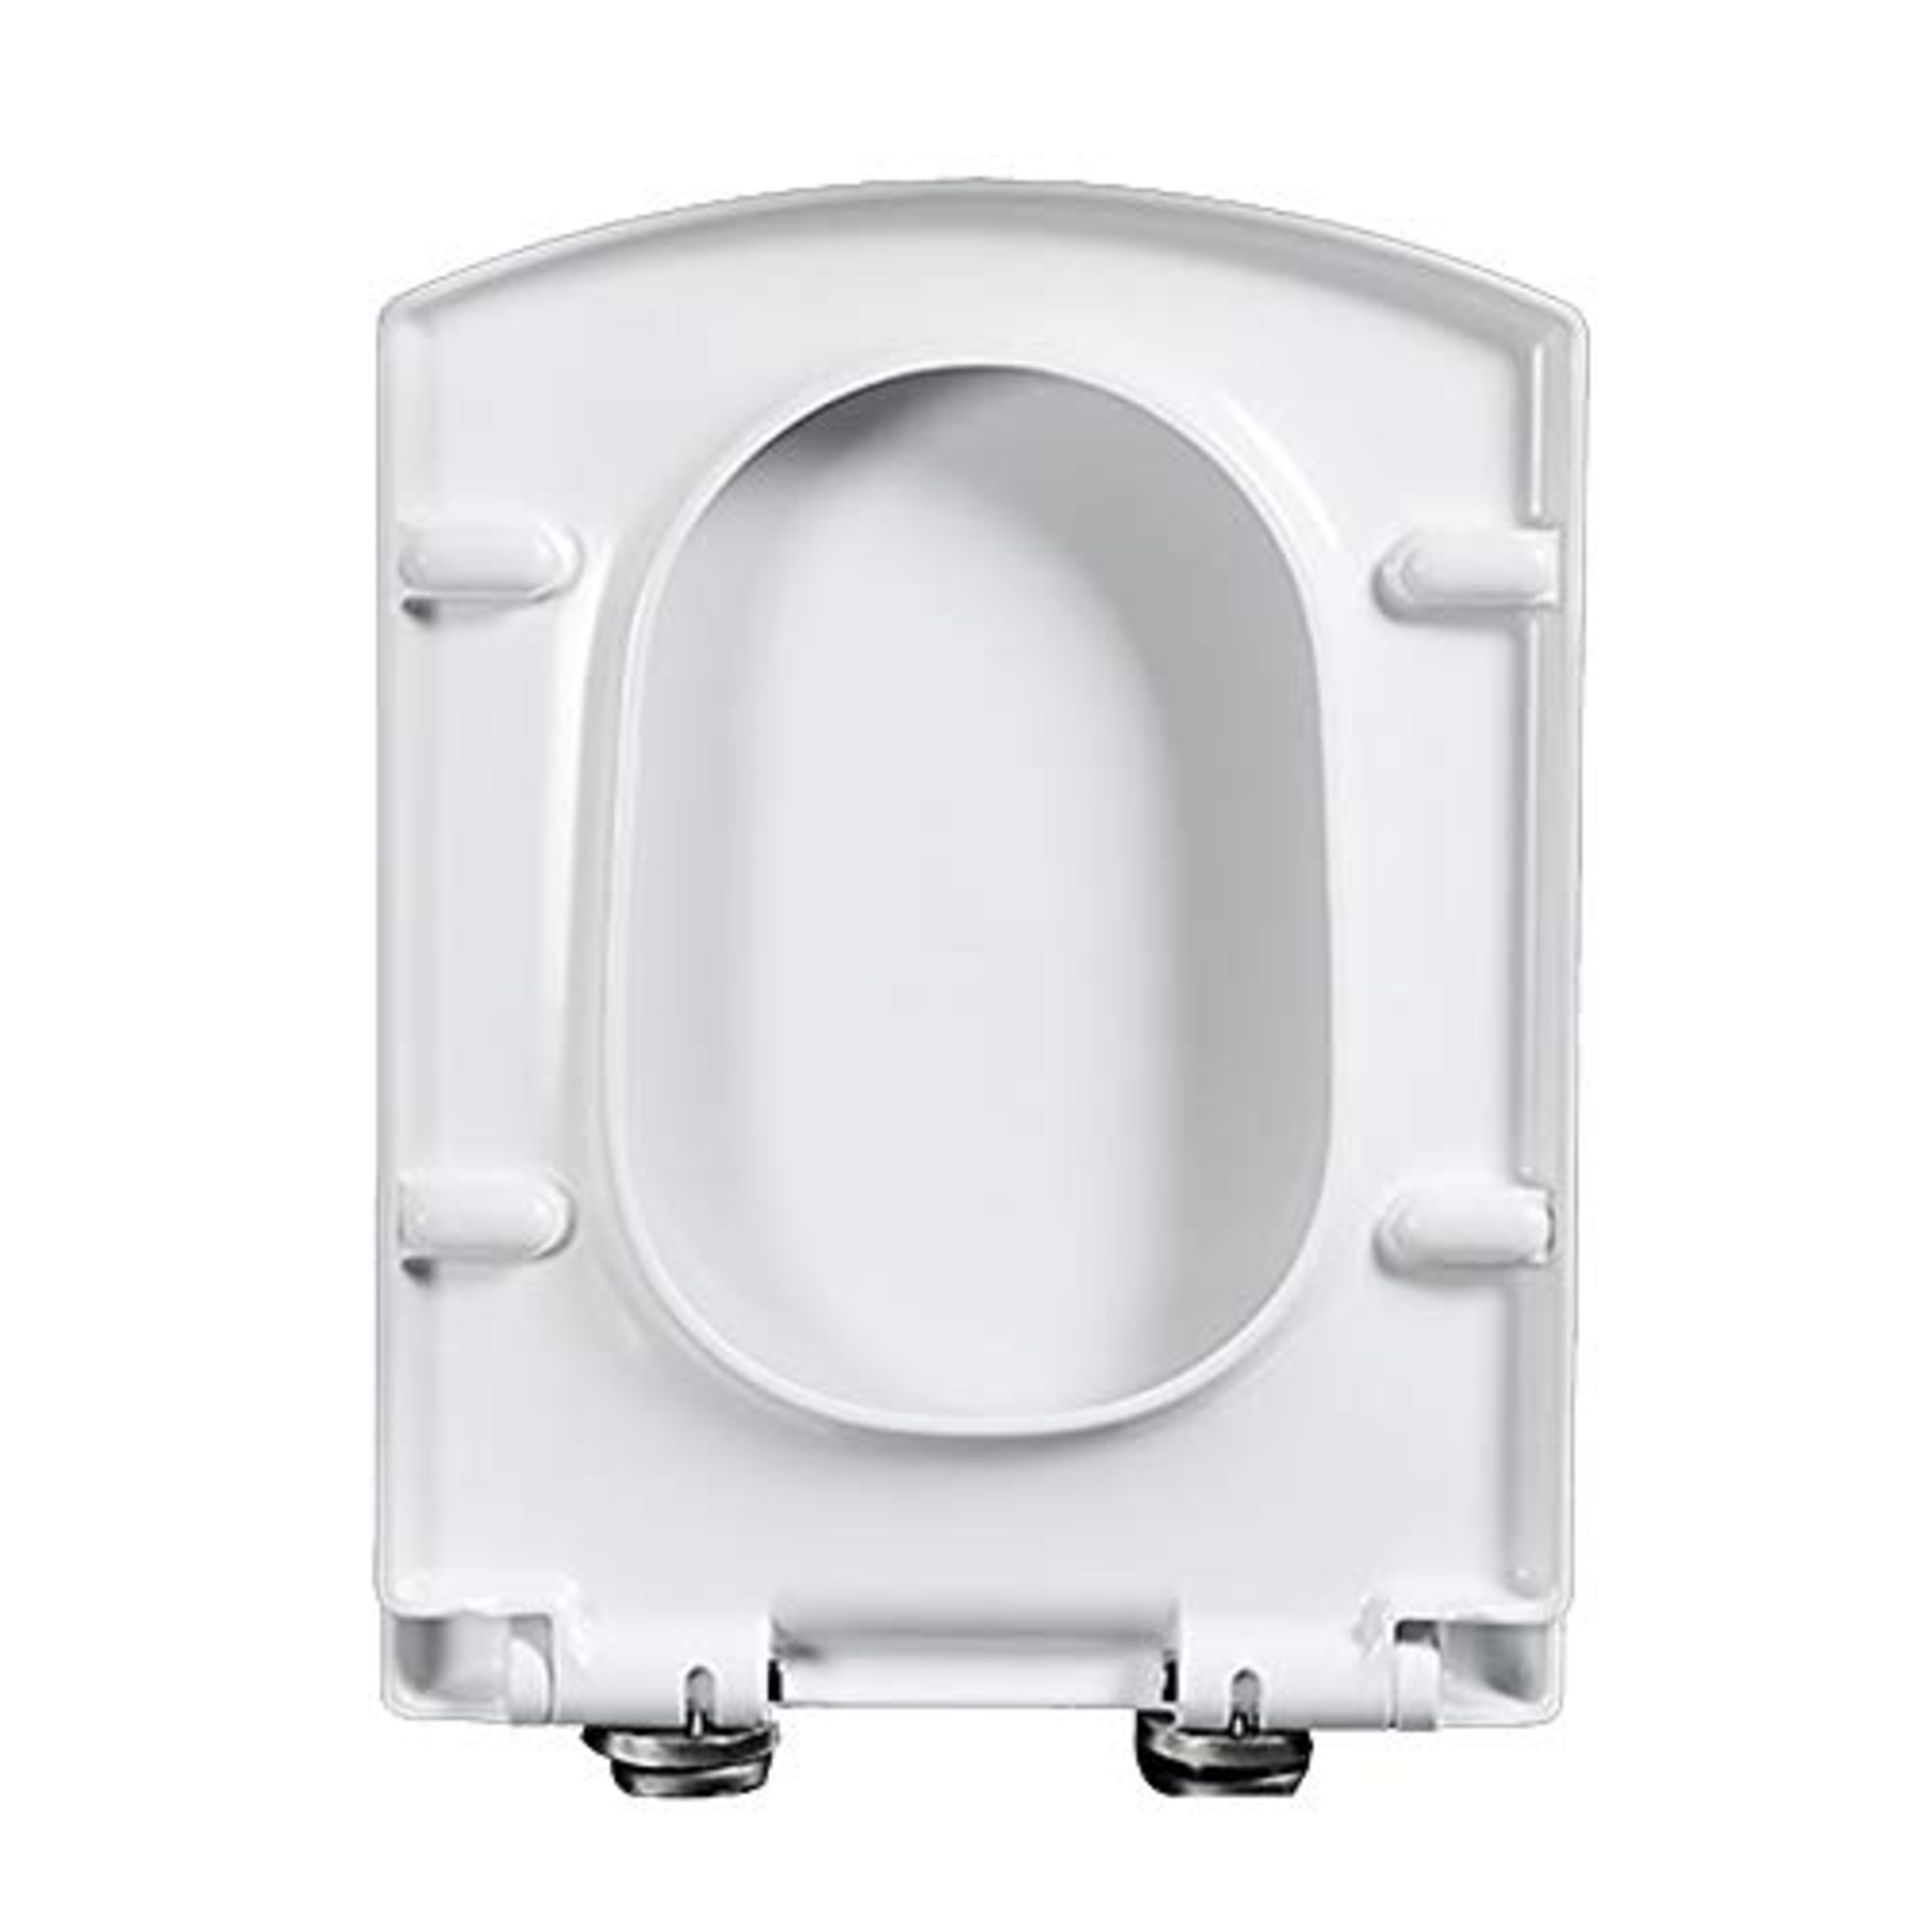 Keebgyy Toilet Seats Multifunctional Quiet Close PP Material Rectangle Type Thicken Mu